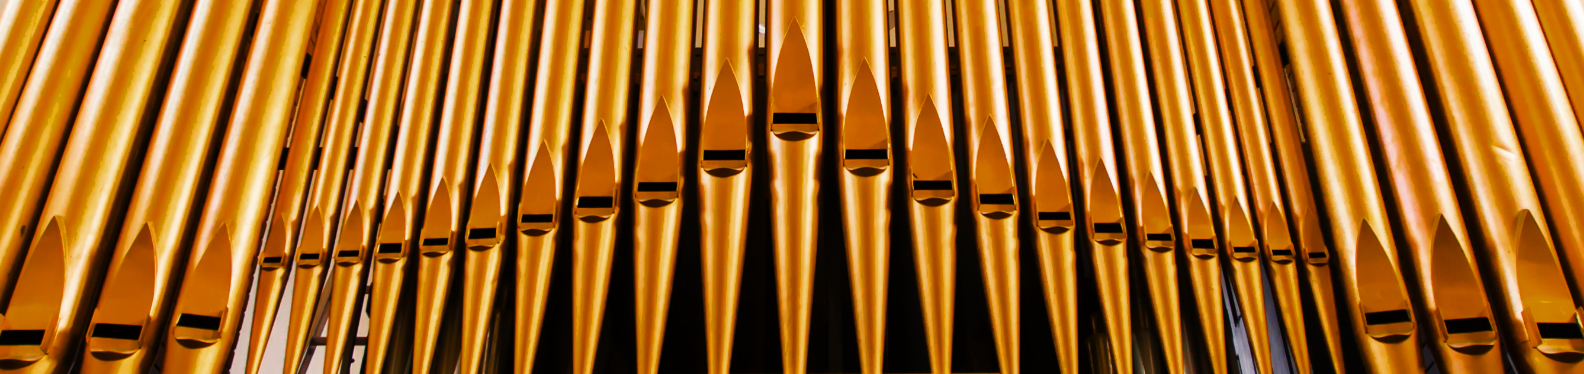 Gold coloured organ pipes